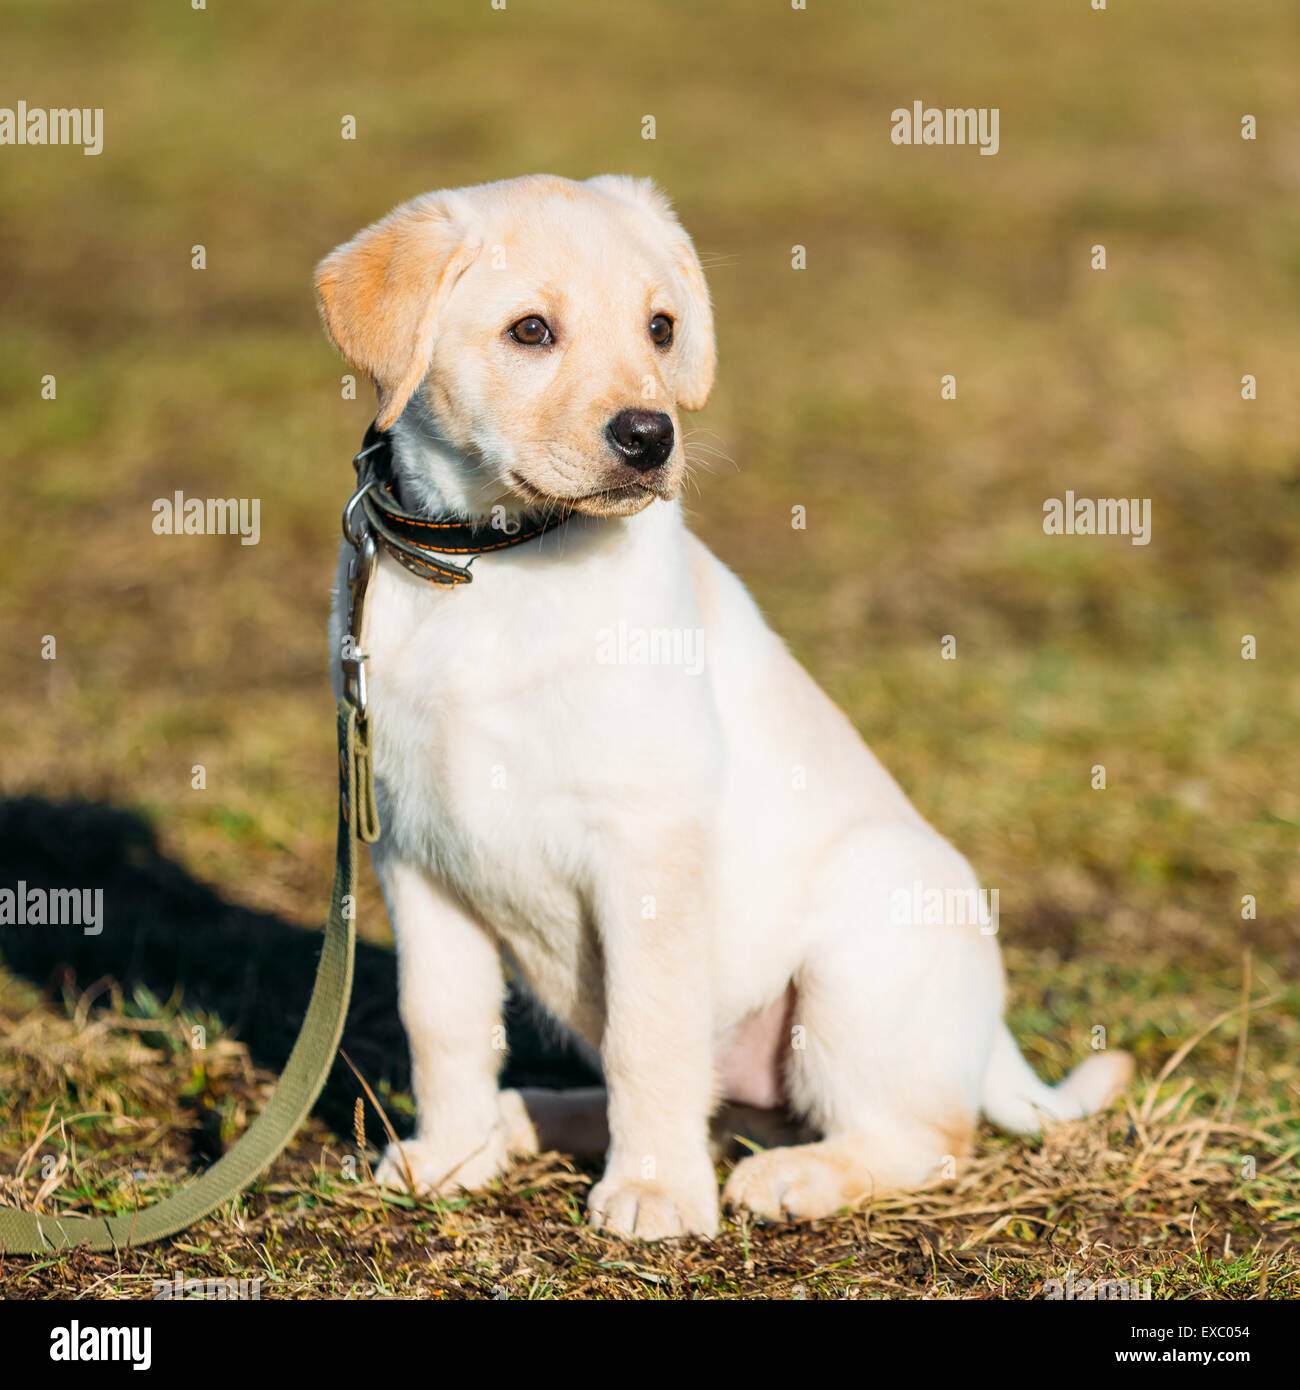 Beautiful White Dog Lab Labrador Retriever Pup Puppy Whelp Outdoor In Spring Stock Photo